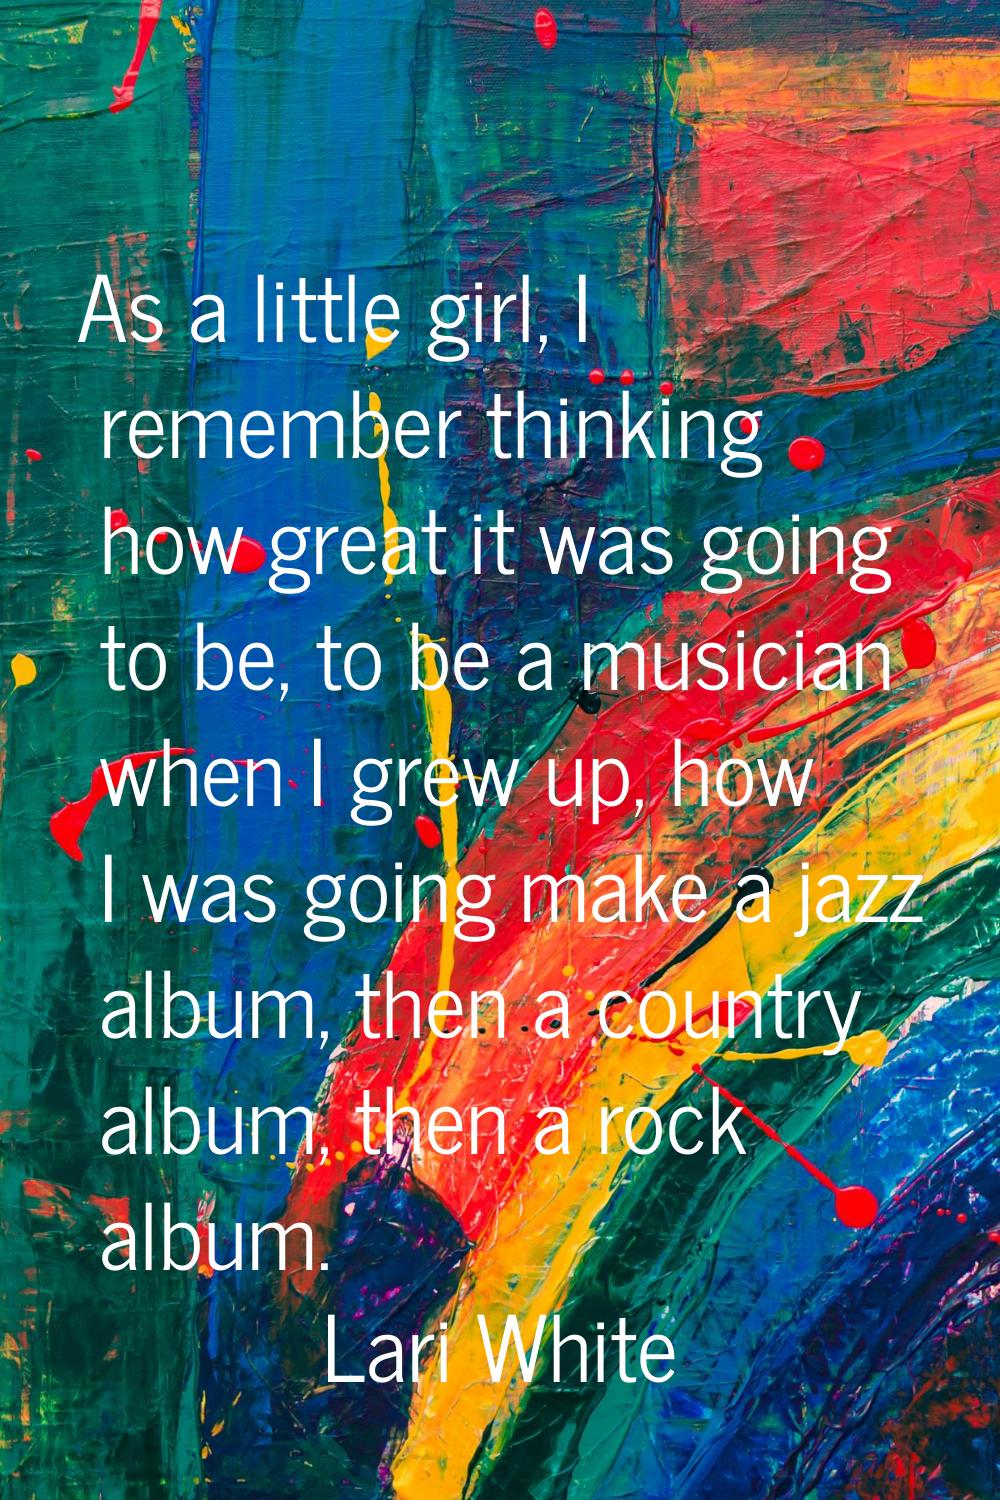 As a little girl, I remember thinking how great it was going to be, to be a musician when I grew up